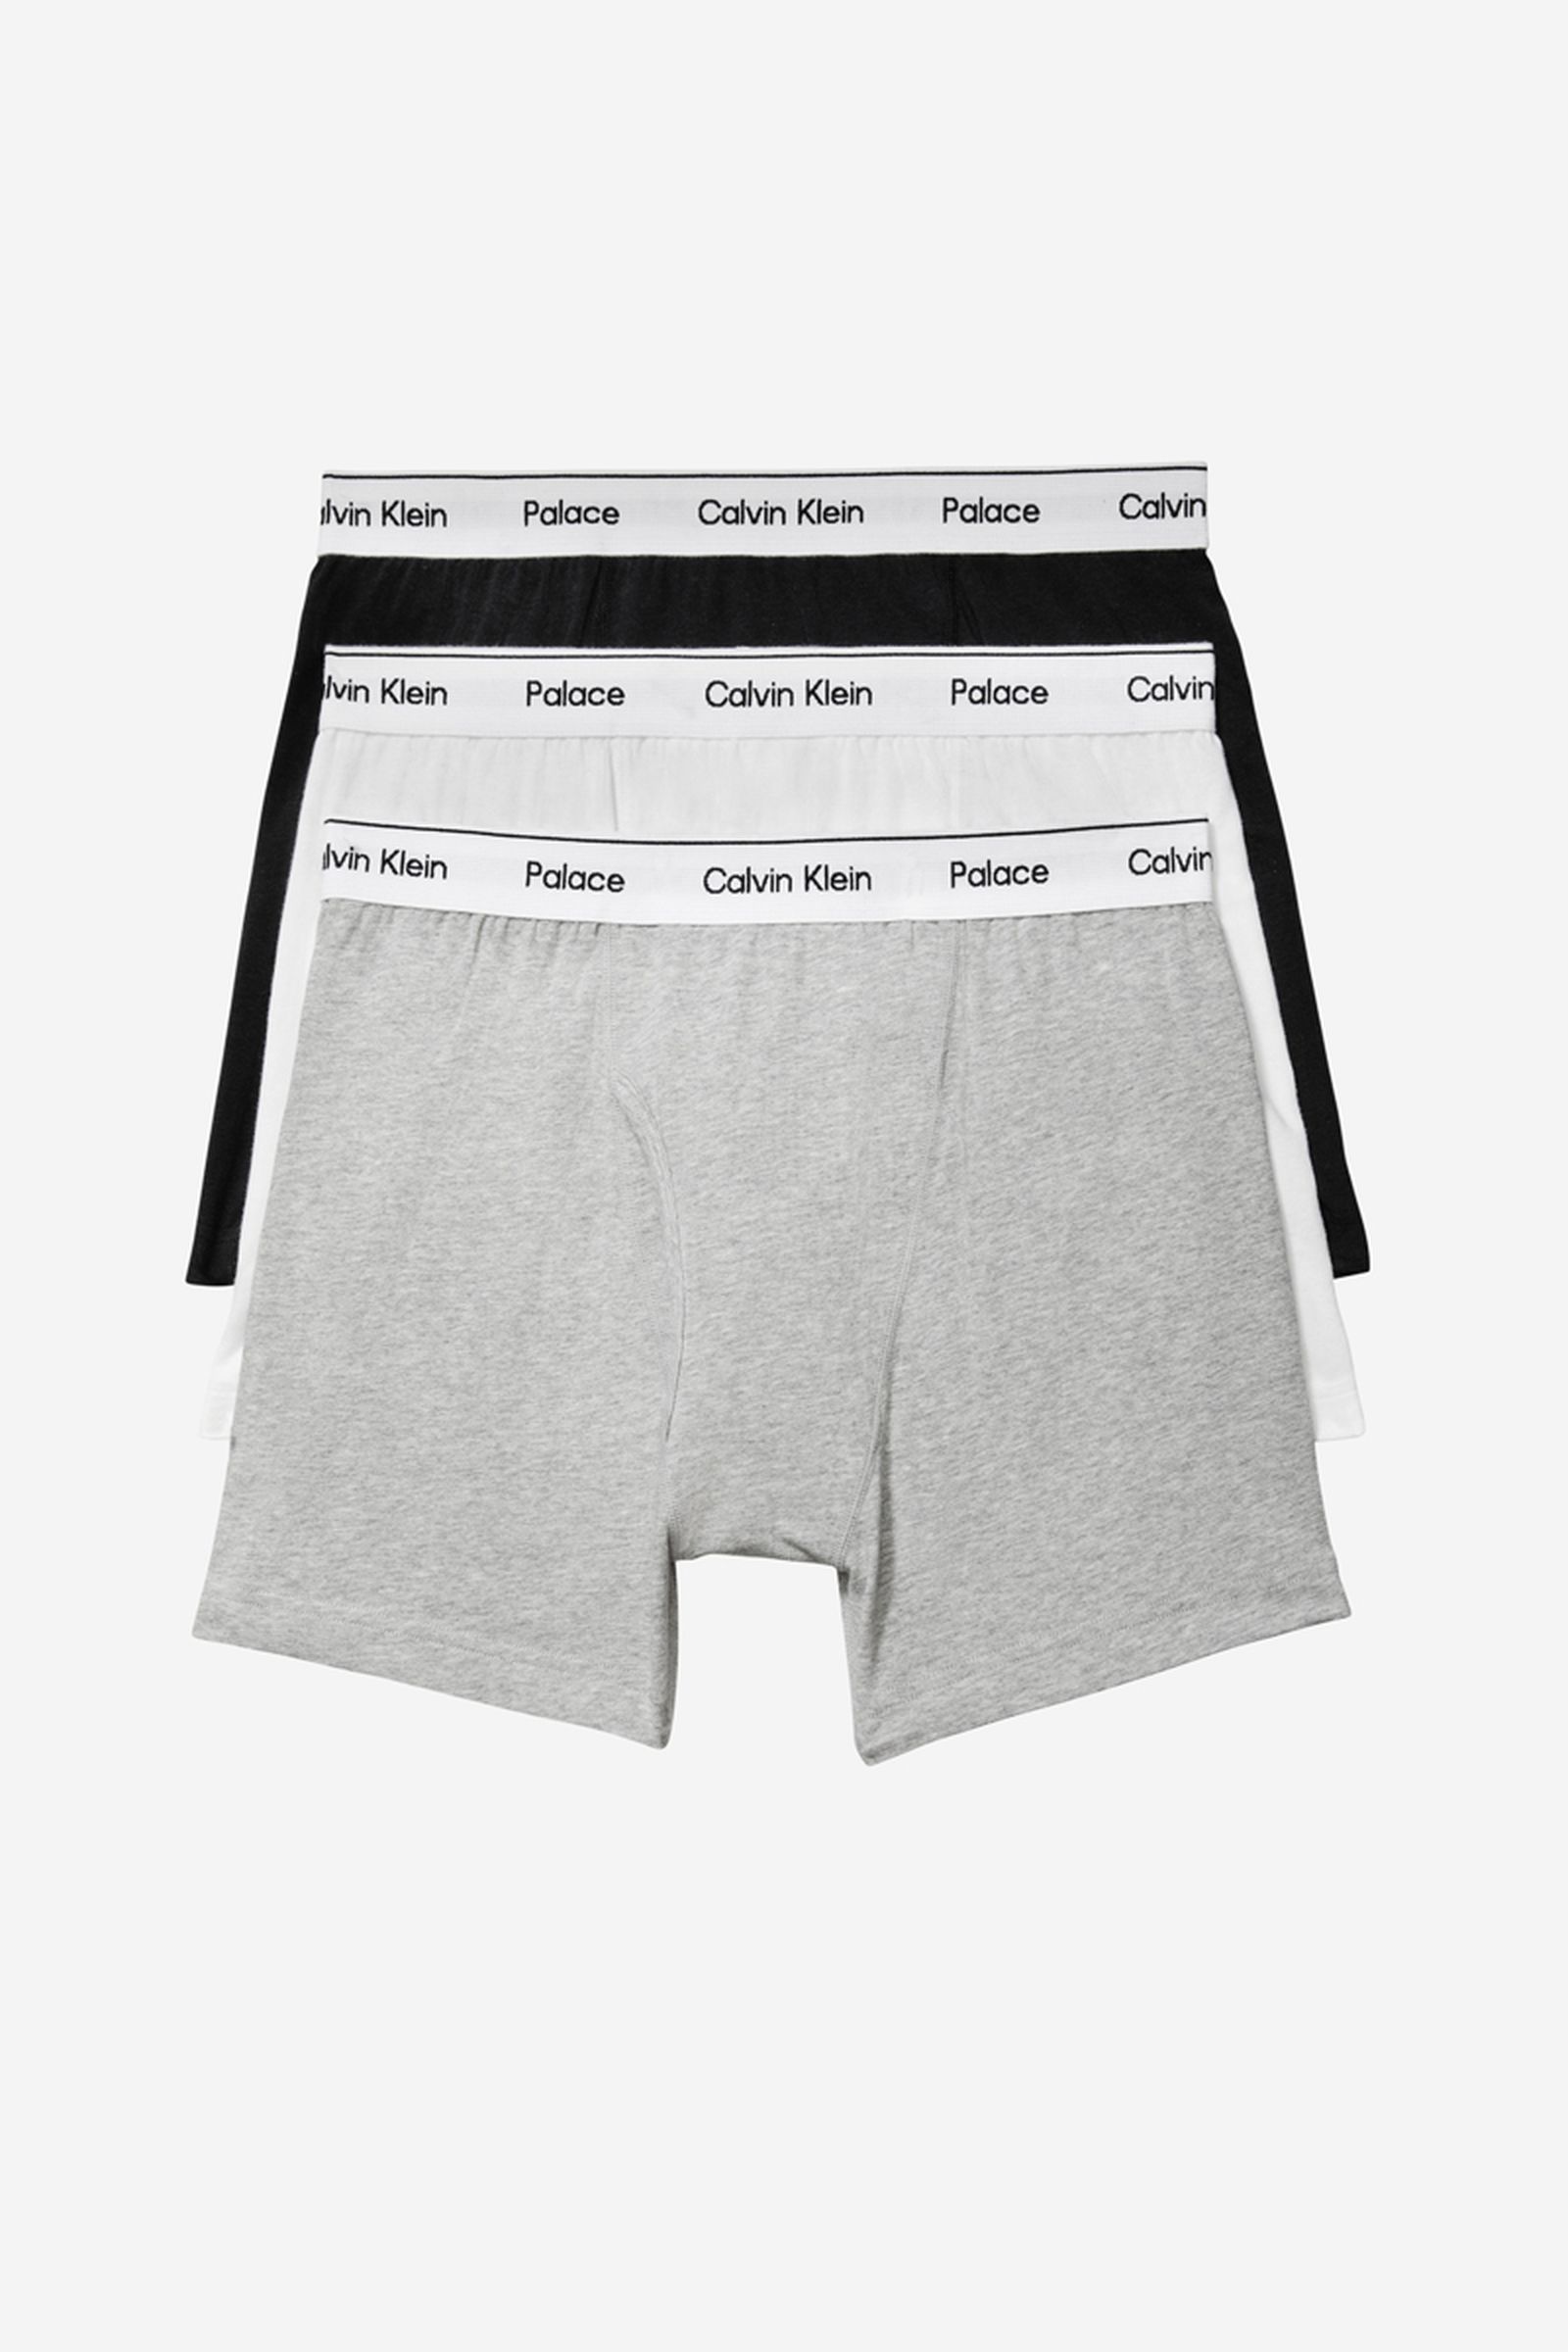 palace-calvin-klein-collab-collection-price-underwear-release-date (4)